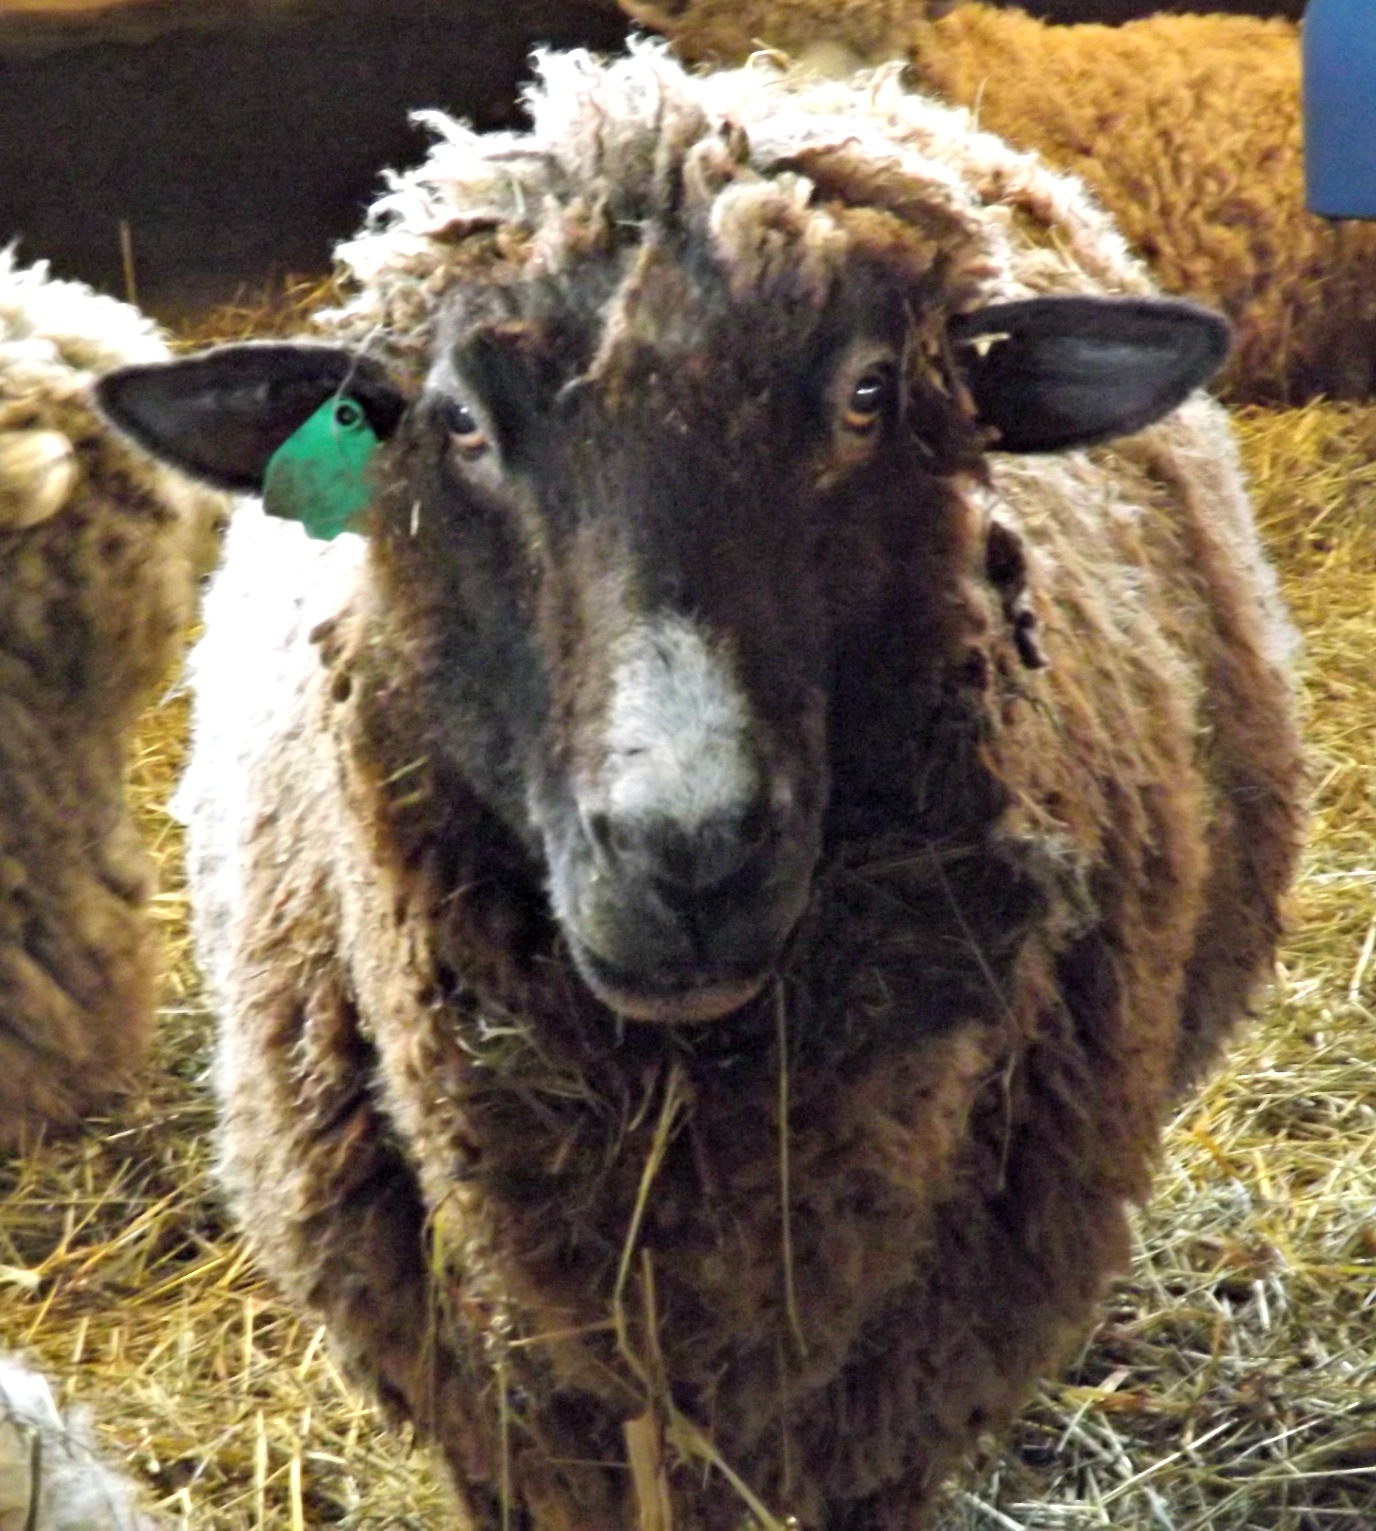 Do Sheep Have Wool or Hair?